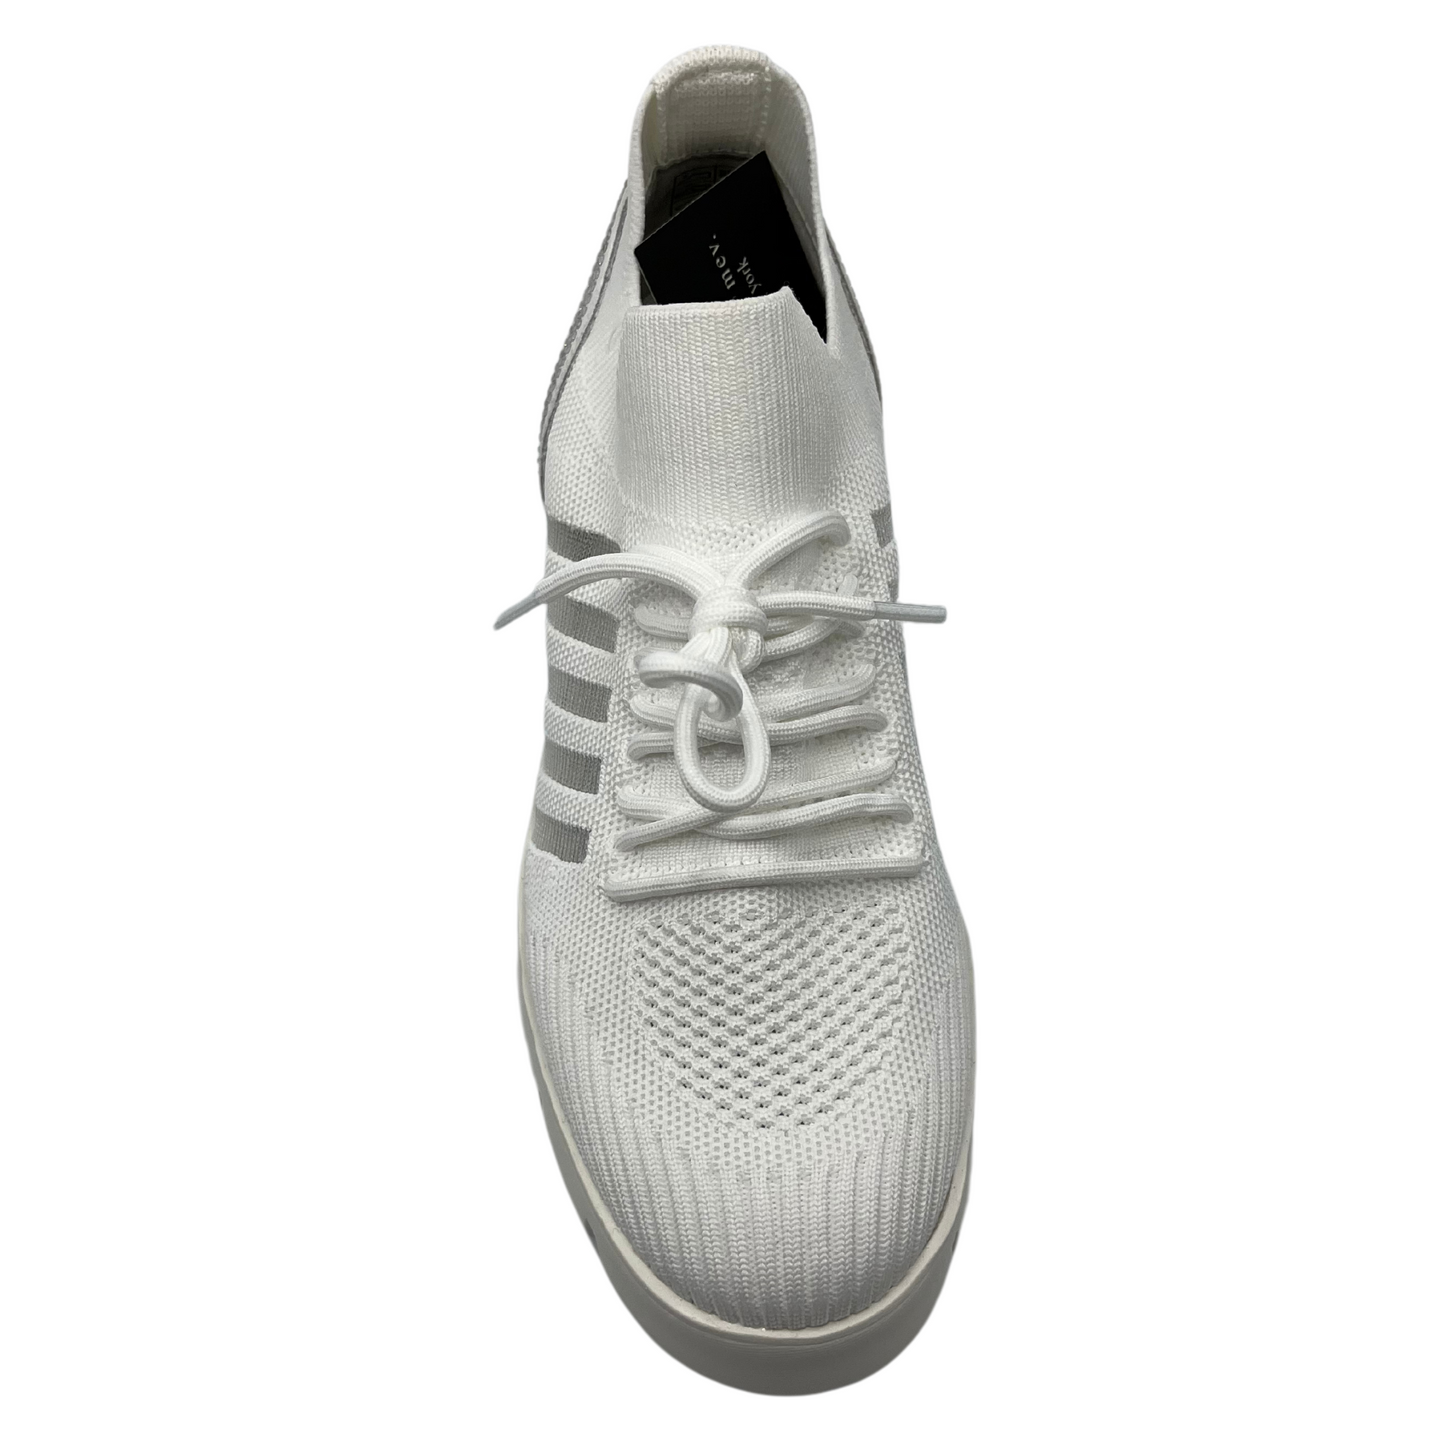 Top view of white mesh sneaker with thick rubber sole and crystal details on the heel